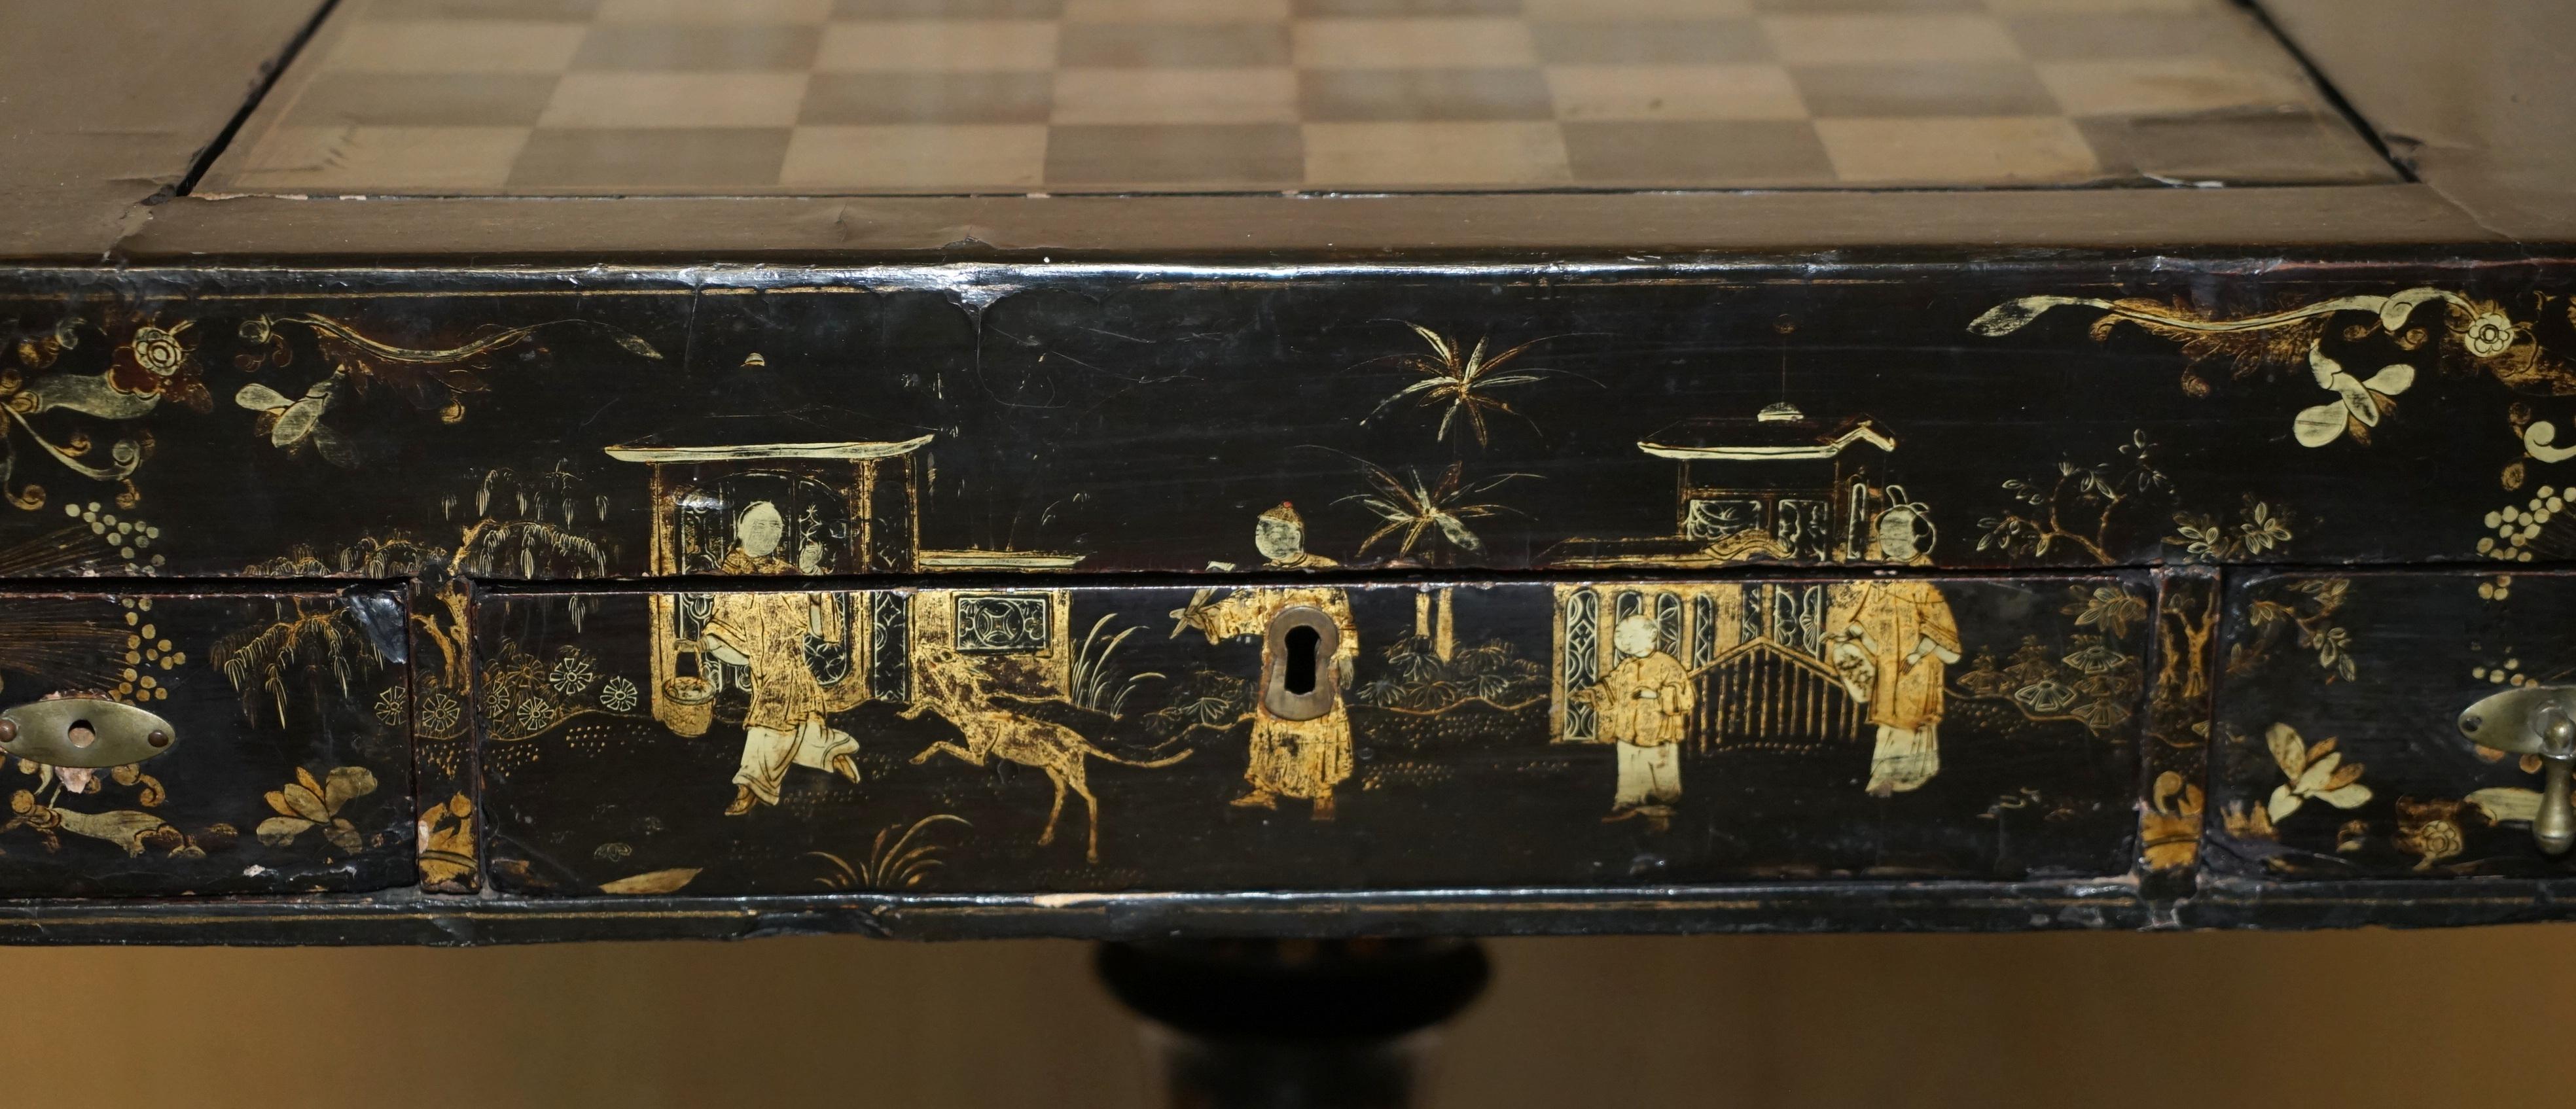 ANTIQUE GEORGIAN CIRCA 1820 CHiNESE CHINOISERIE CHESSBOARD BACKGAMMON TABLE For Sale 2